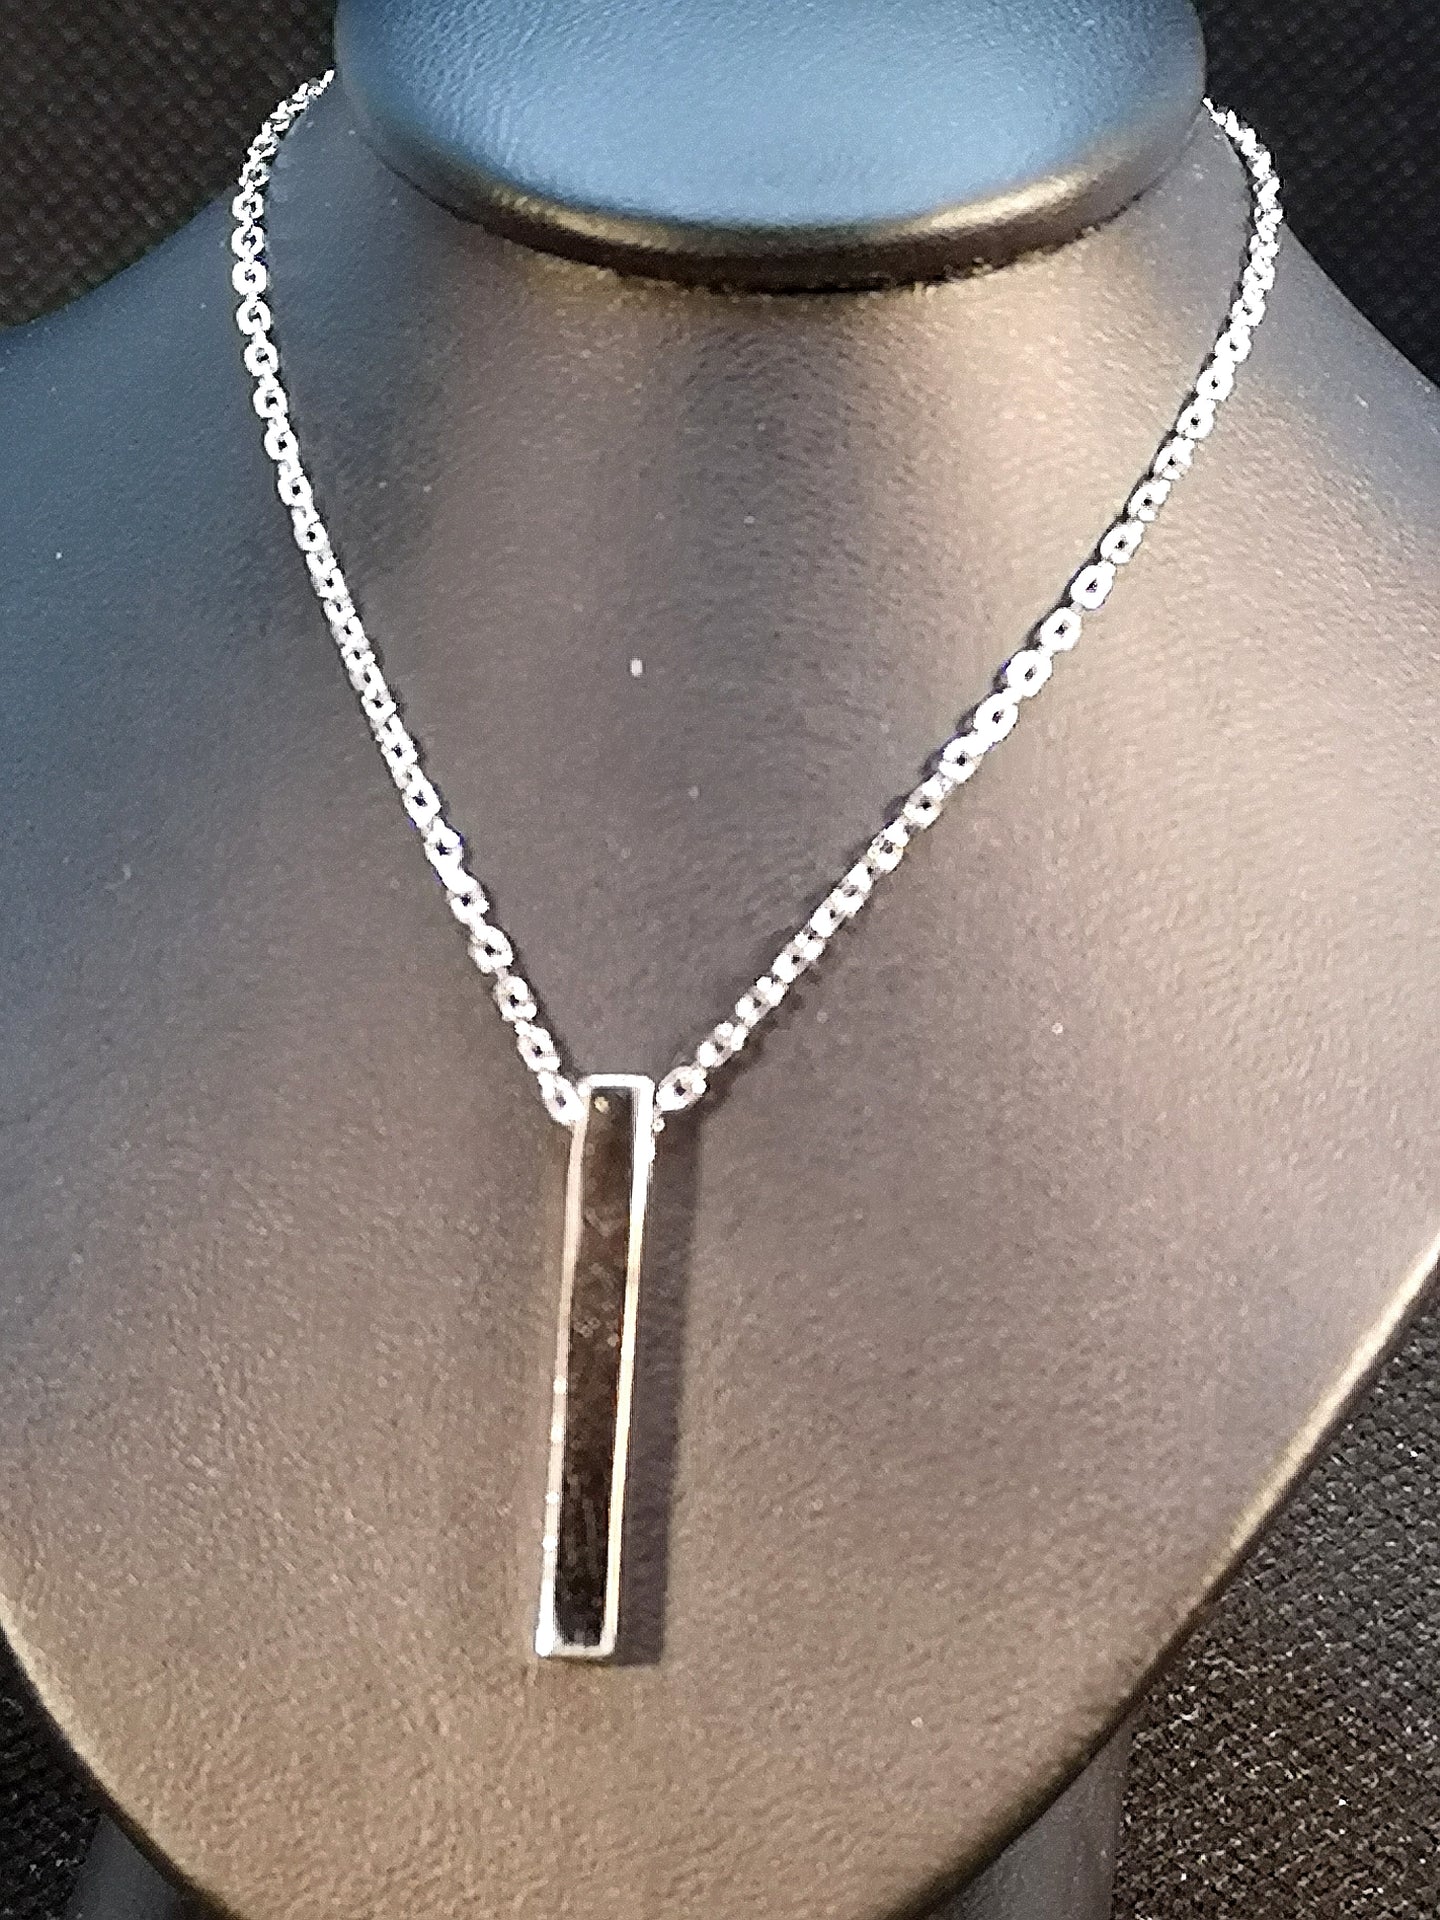 Sterling silver with rhodium finish bar necklace